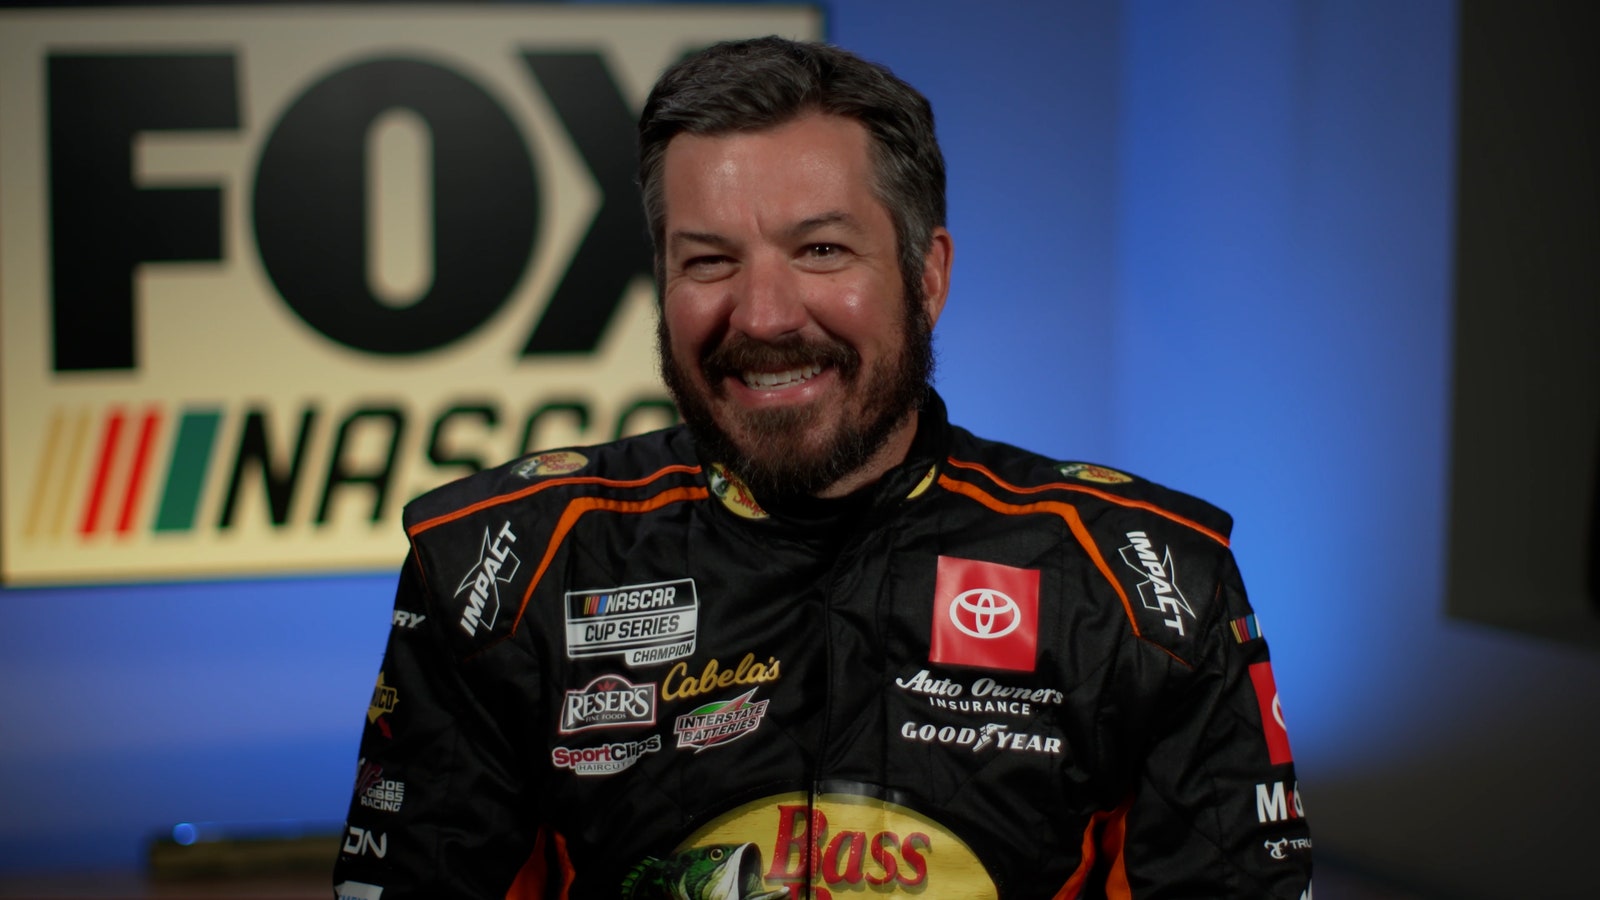 'It's January' – Martin Truex Jr. responds to being asked about potential retirement 